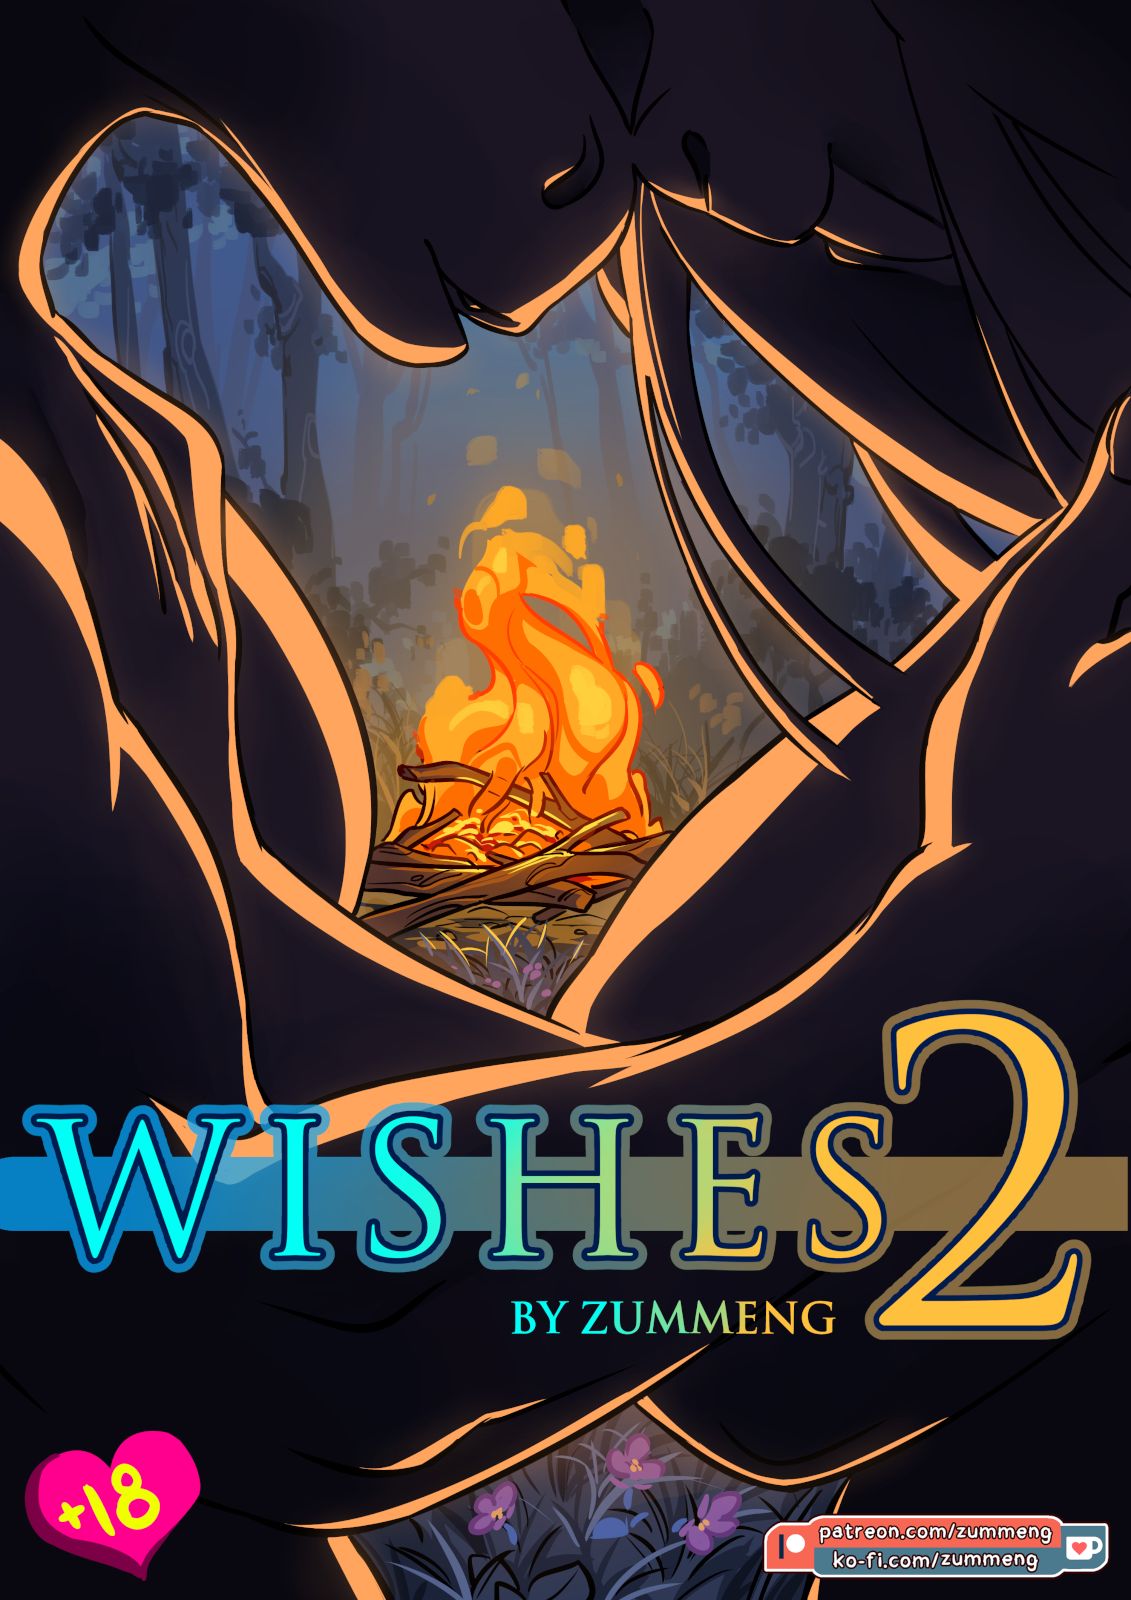 [Zummeng] Wishes 2 | 希冀 2 [Chinese]305寝个人汉化 